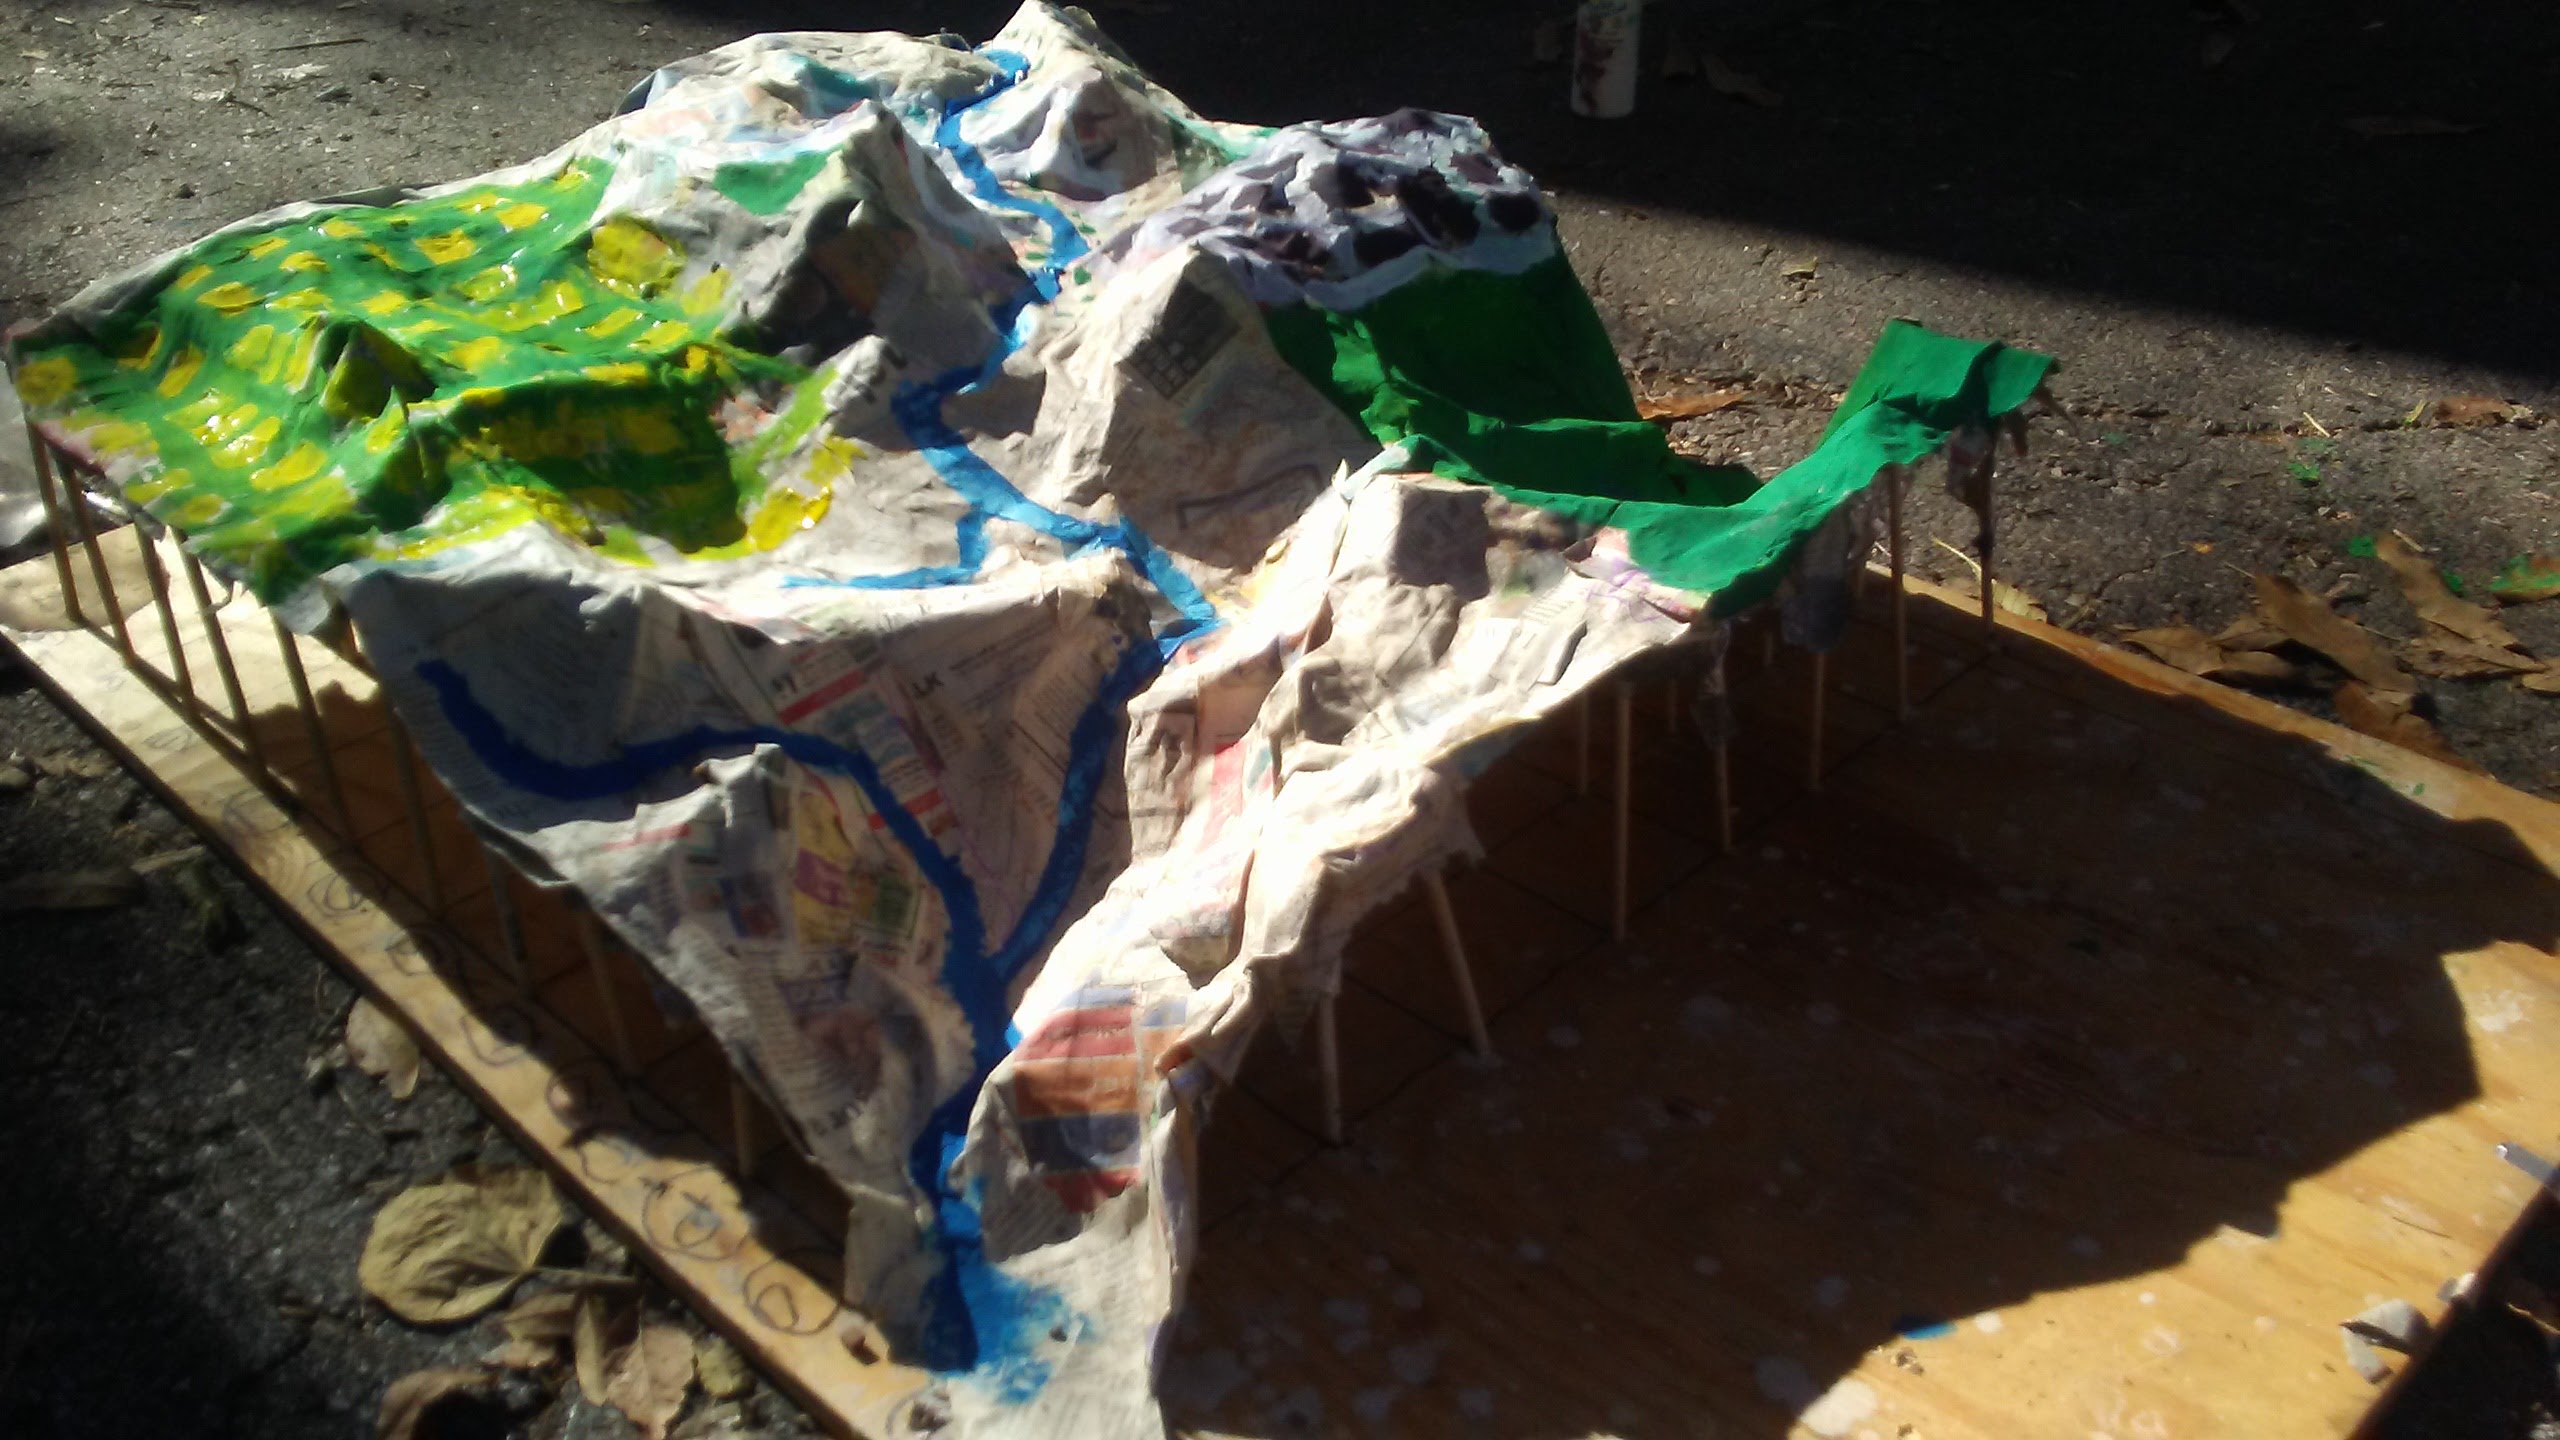 Students built a 3D model of the Flat Branch Creek watershed, and painted it to reflect land uses we observed through the neighborhood.